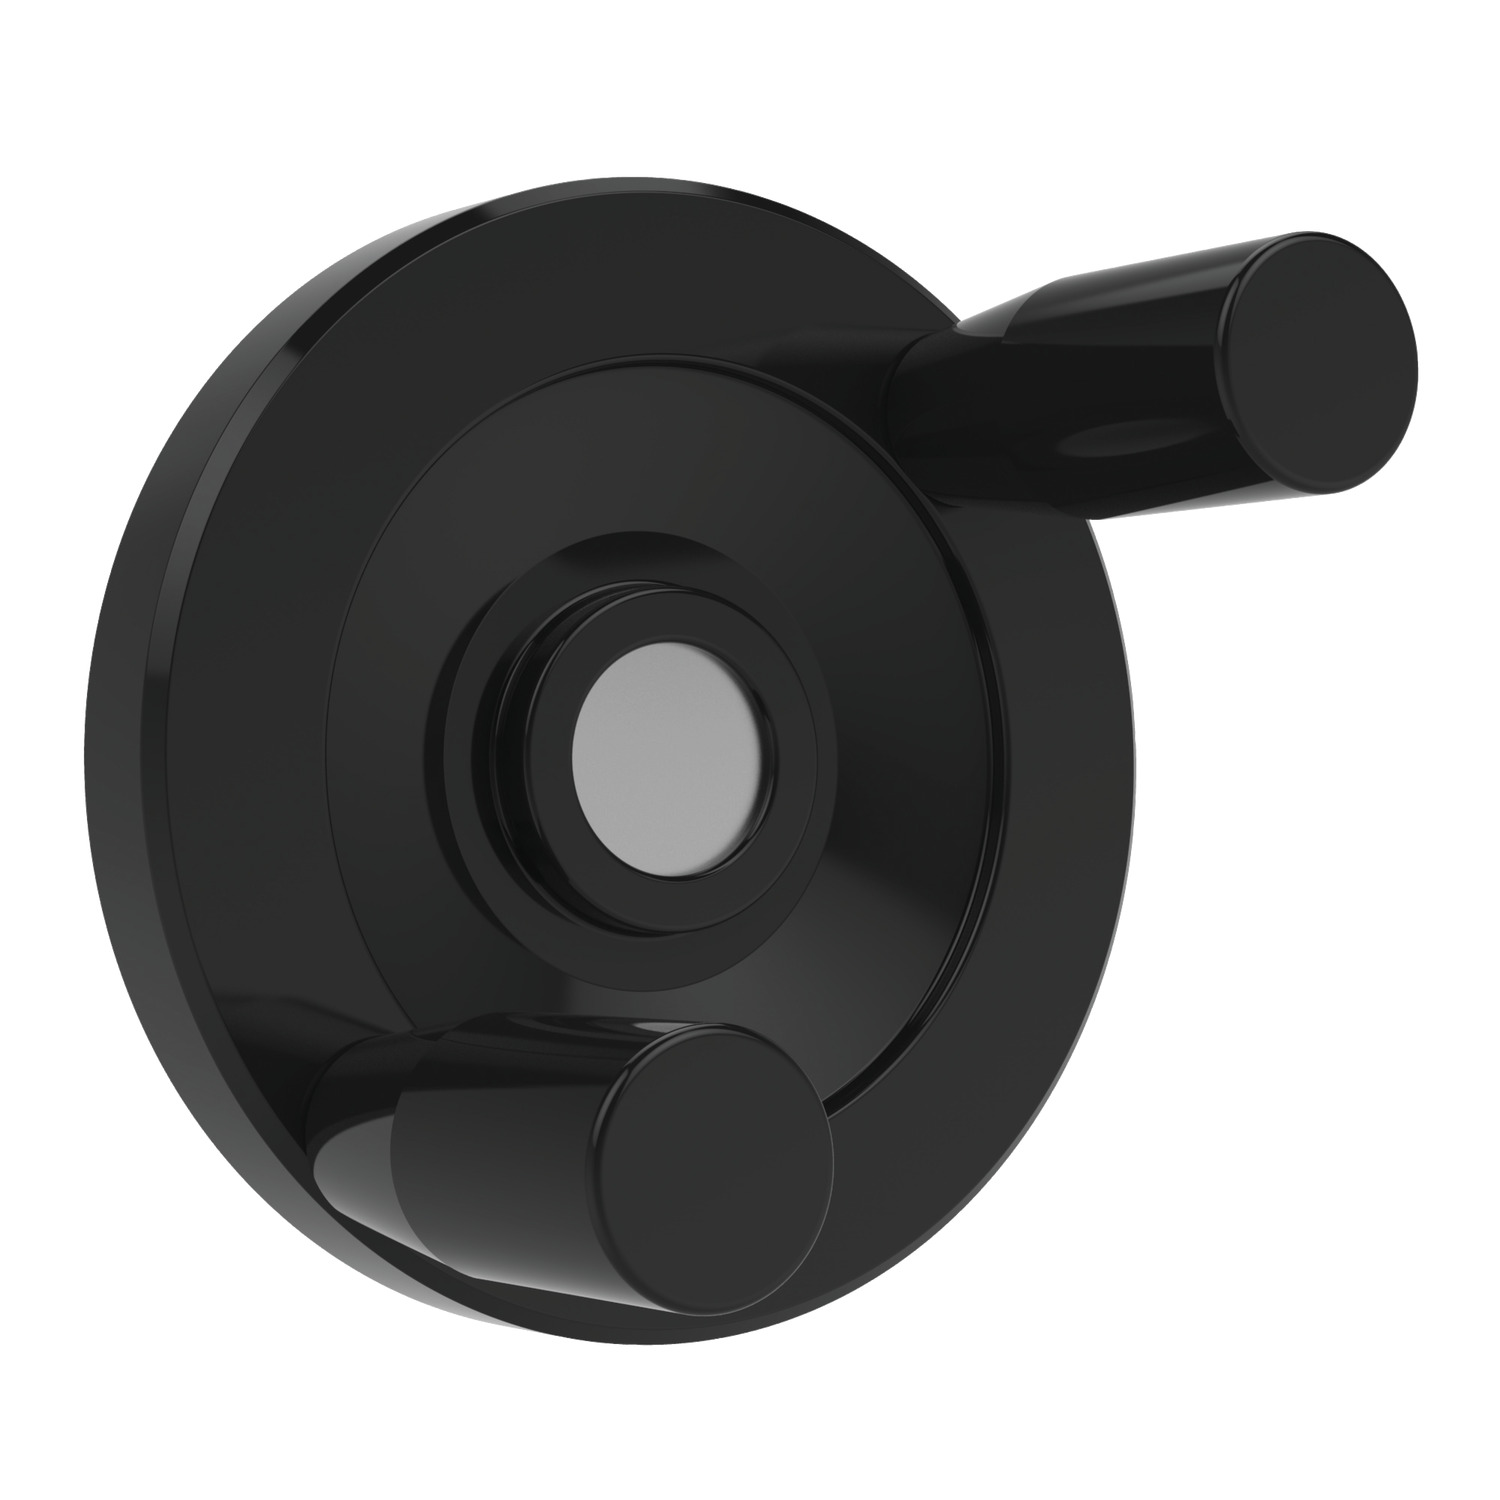 Solid Disc Handwheels Twin fixed handle for increased ease of use. Made with black duroplast.